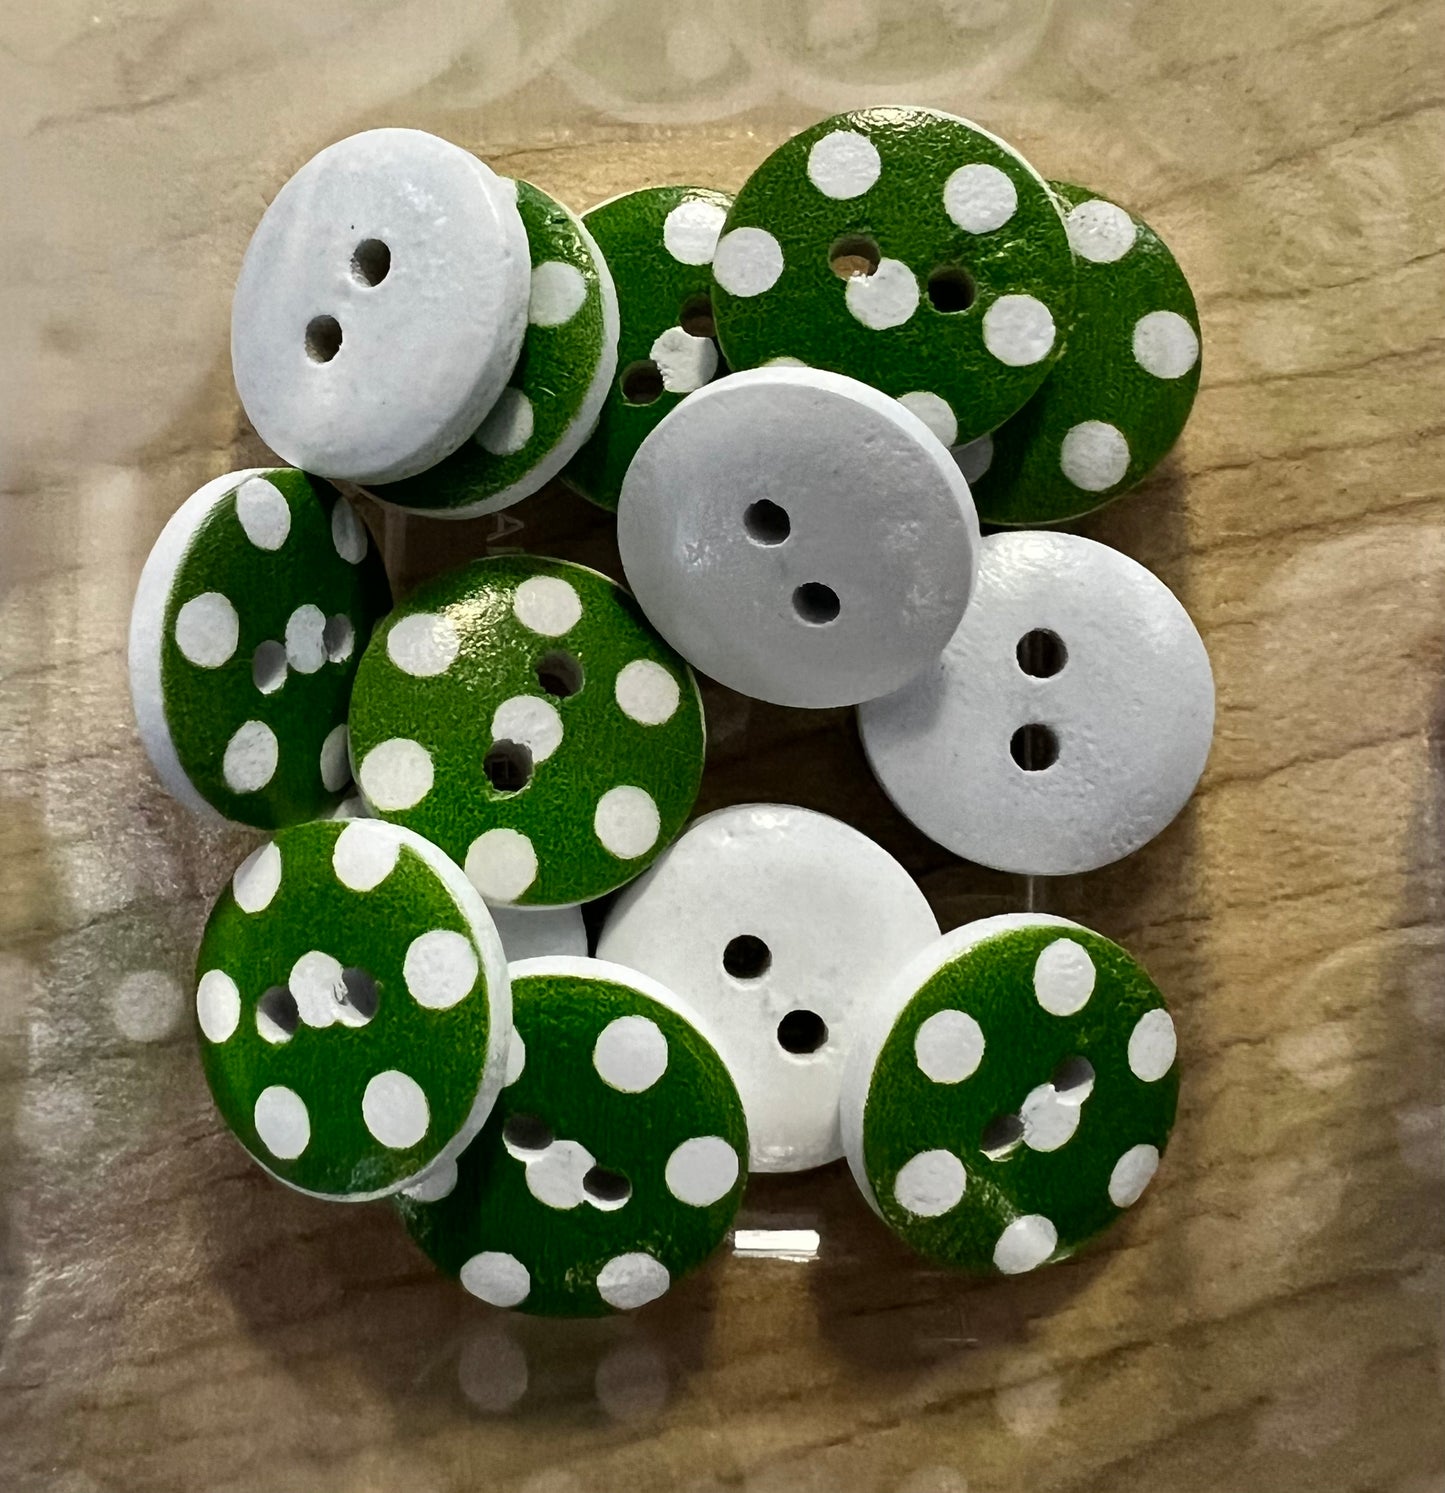 Green with White Dot Buttons 1.5cm